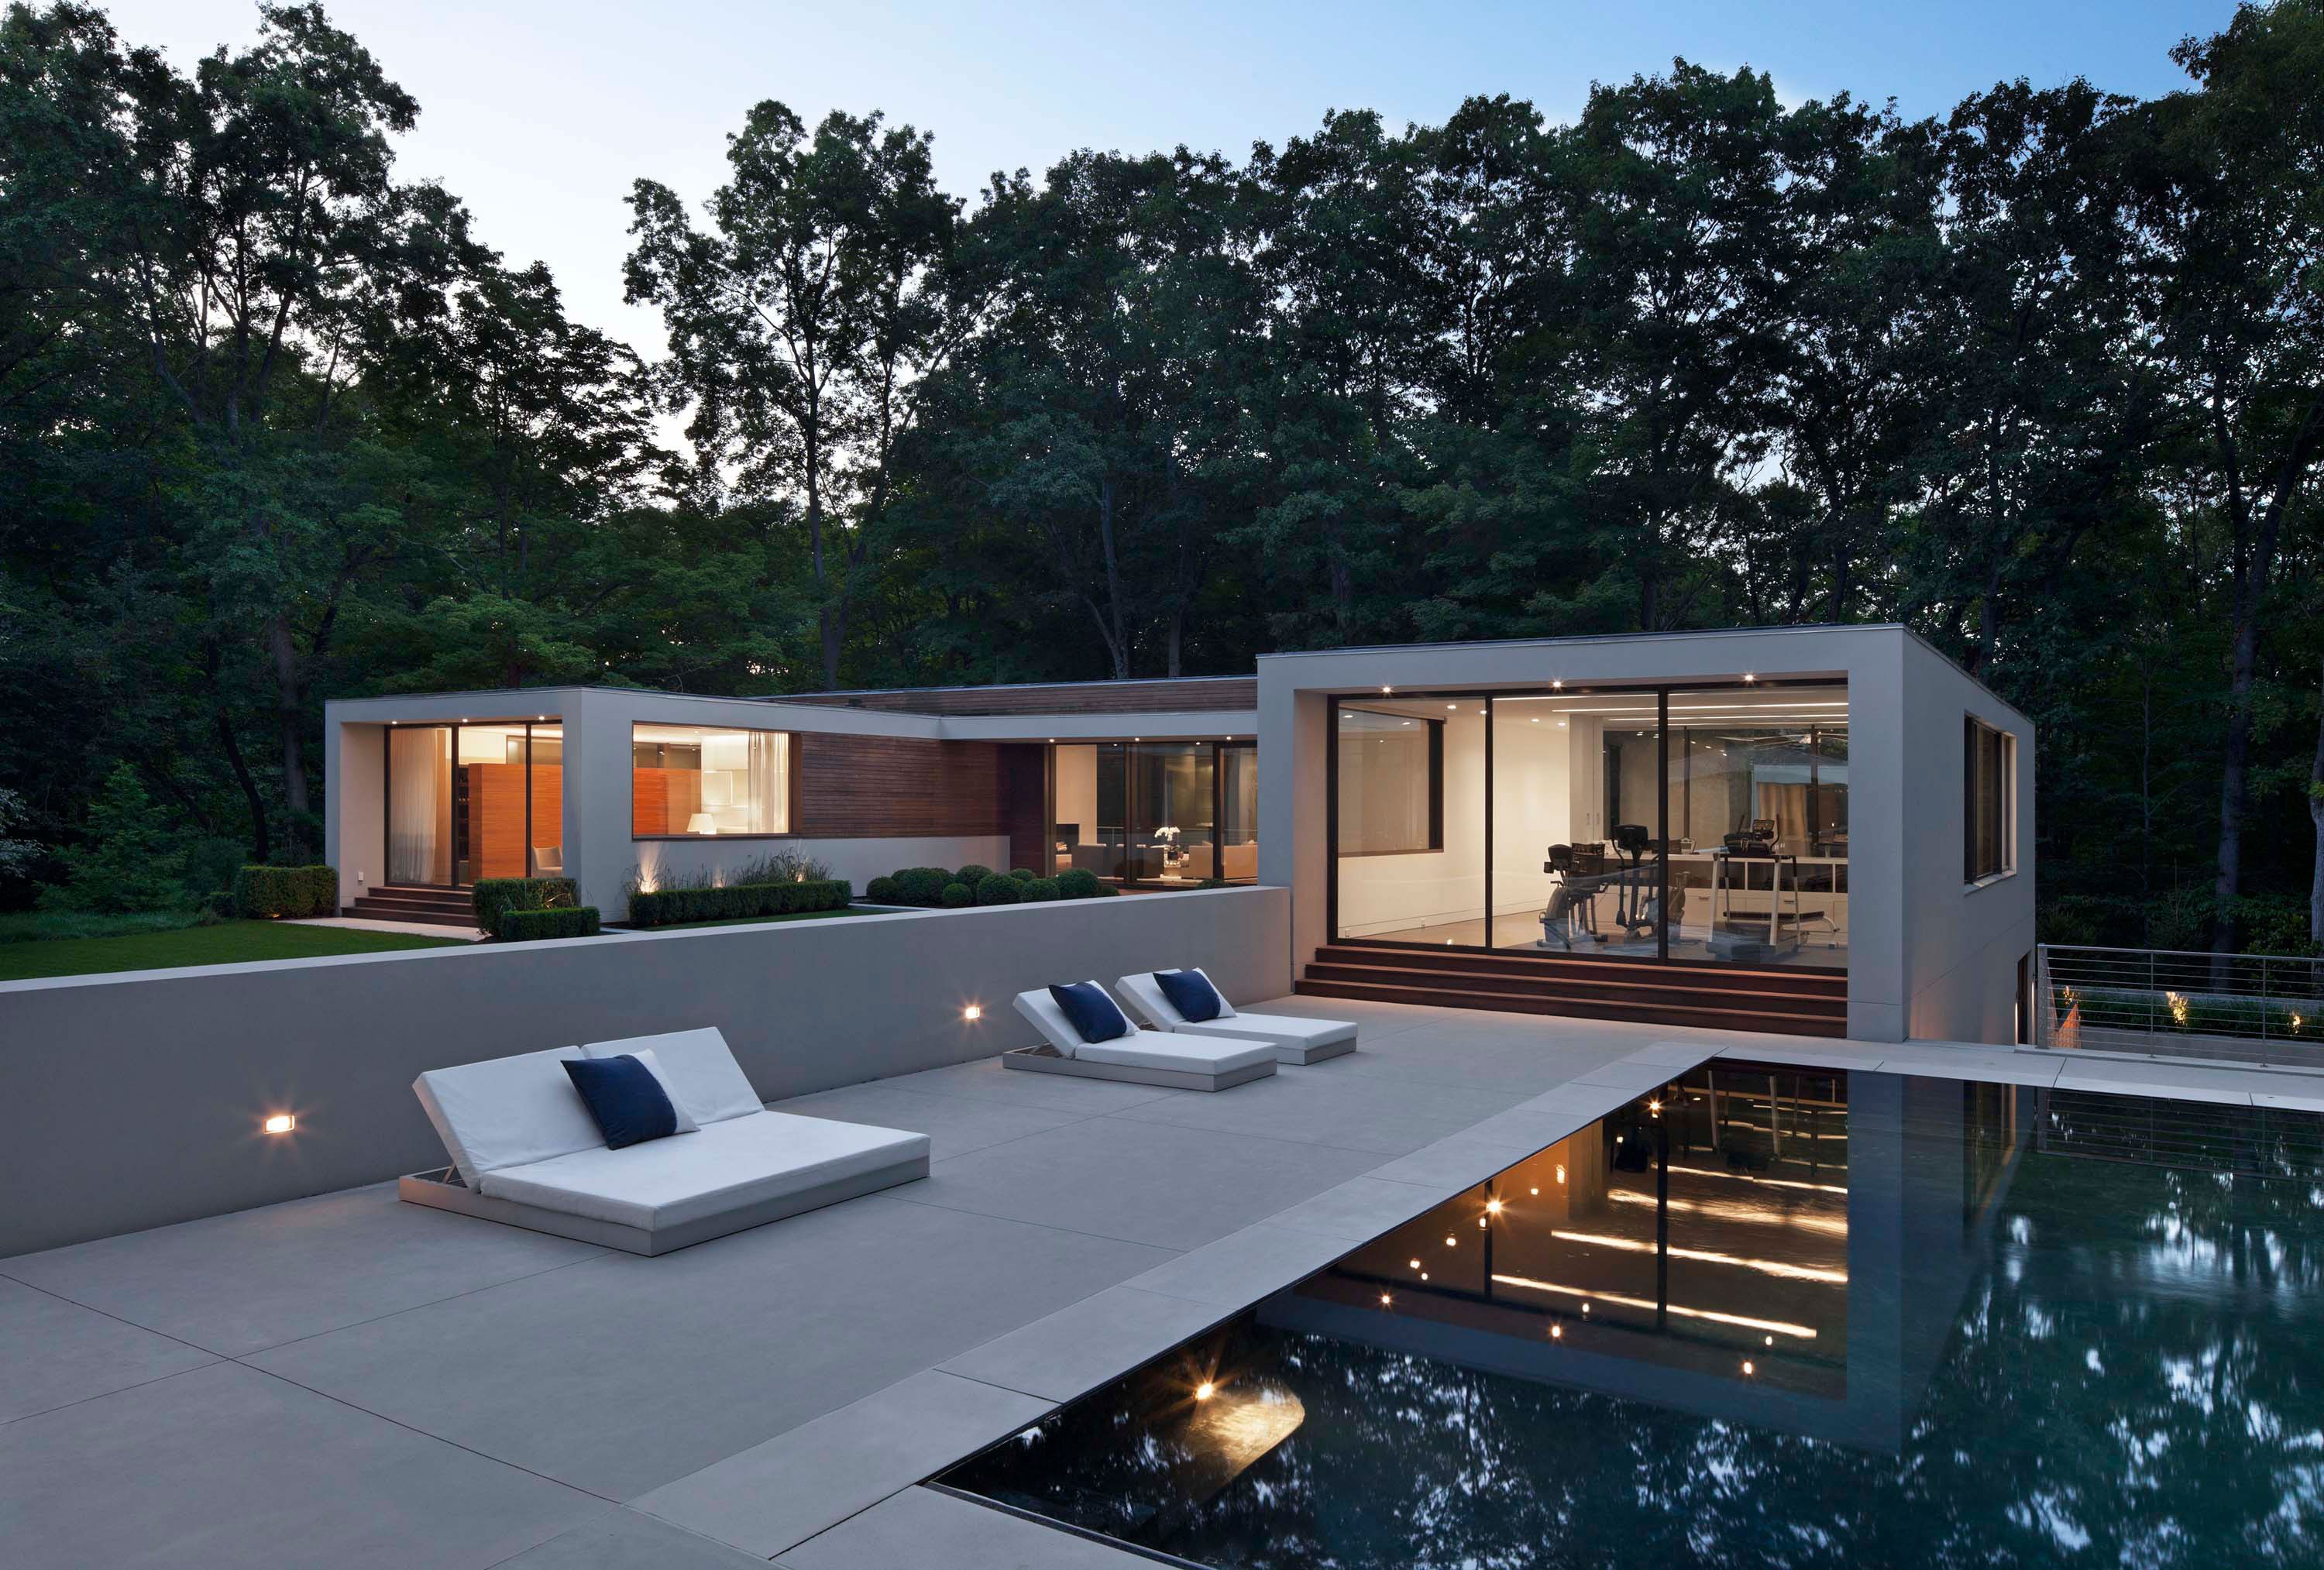 Exterior photo of the New Canaan Residence by Specht Novak Architects. Shot by Elizabeth Felicella featuring the symmetrical home, pool, and lounging area embraced by trees.